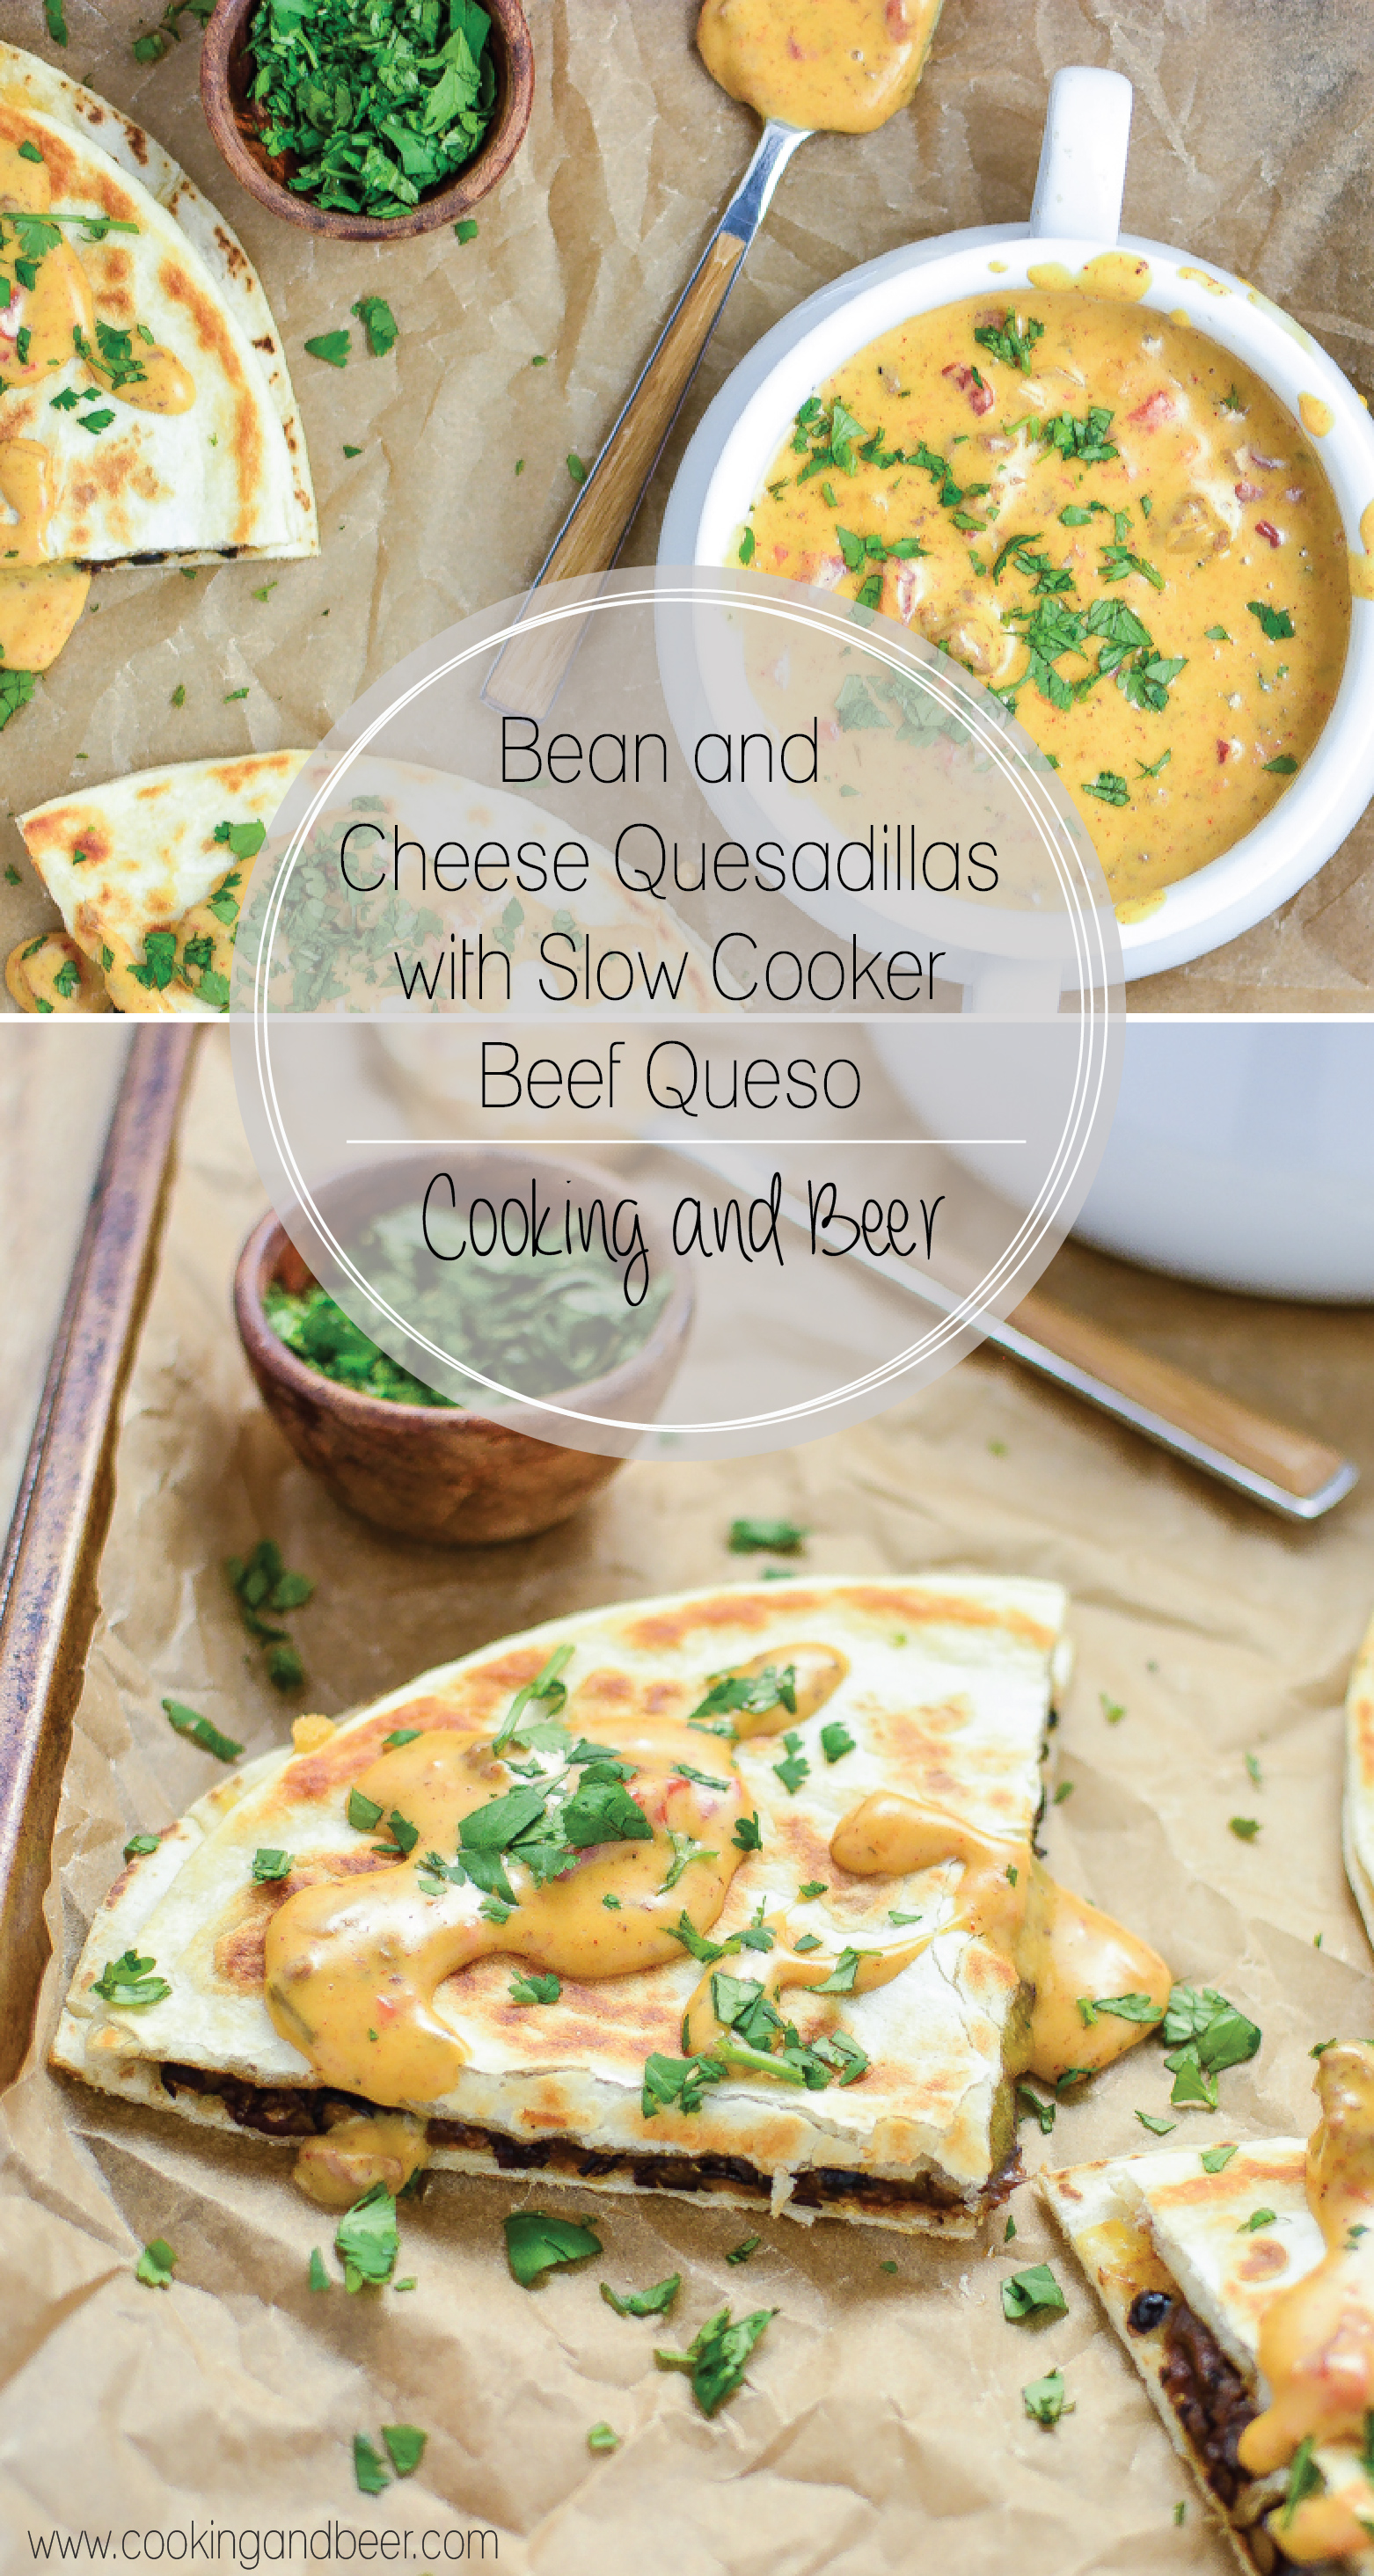 Bean and Cheese Quesadillas with Beef Queso are the perfect appetizer for game day or weeknight dinner recipe!